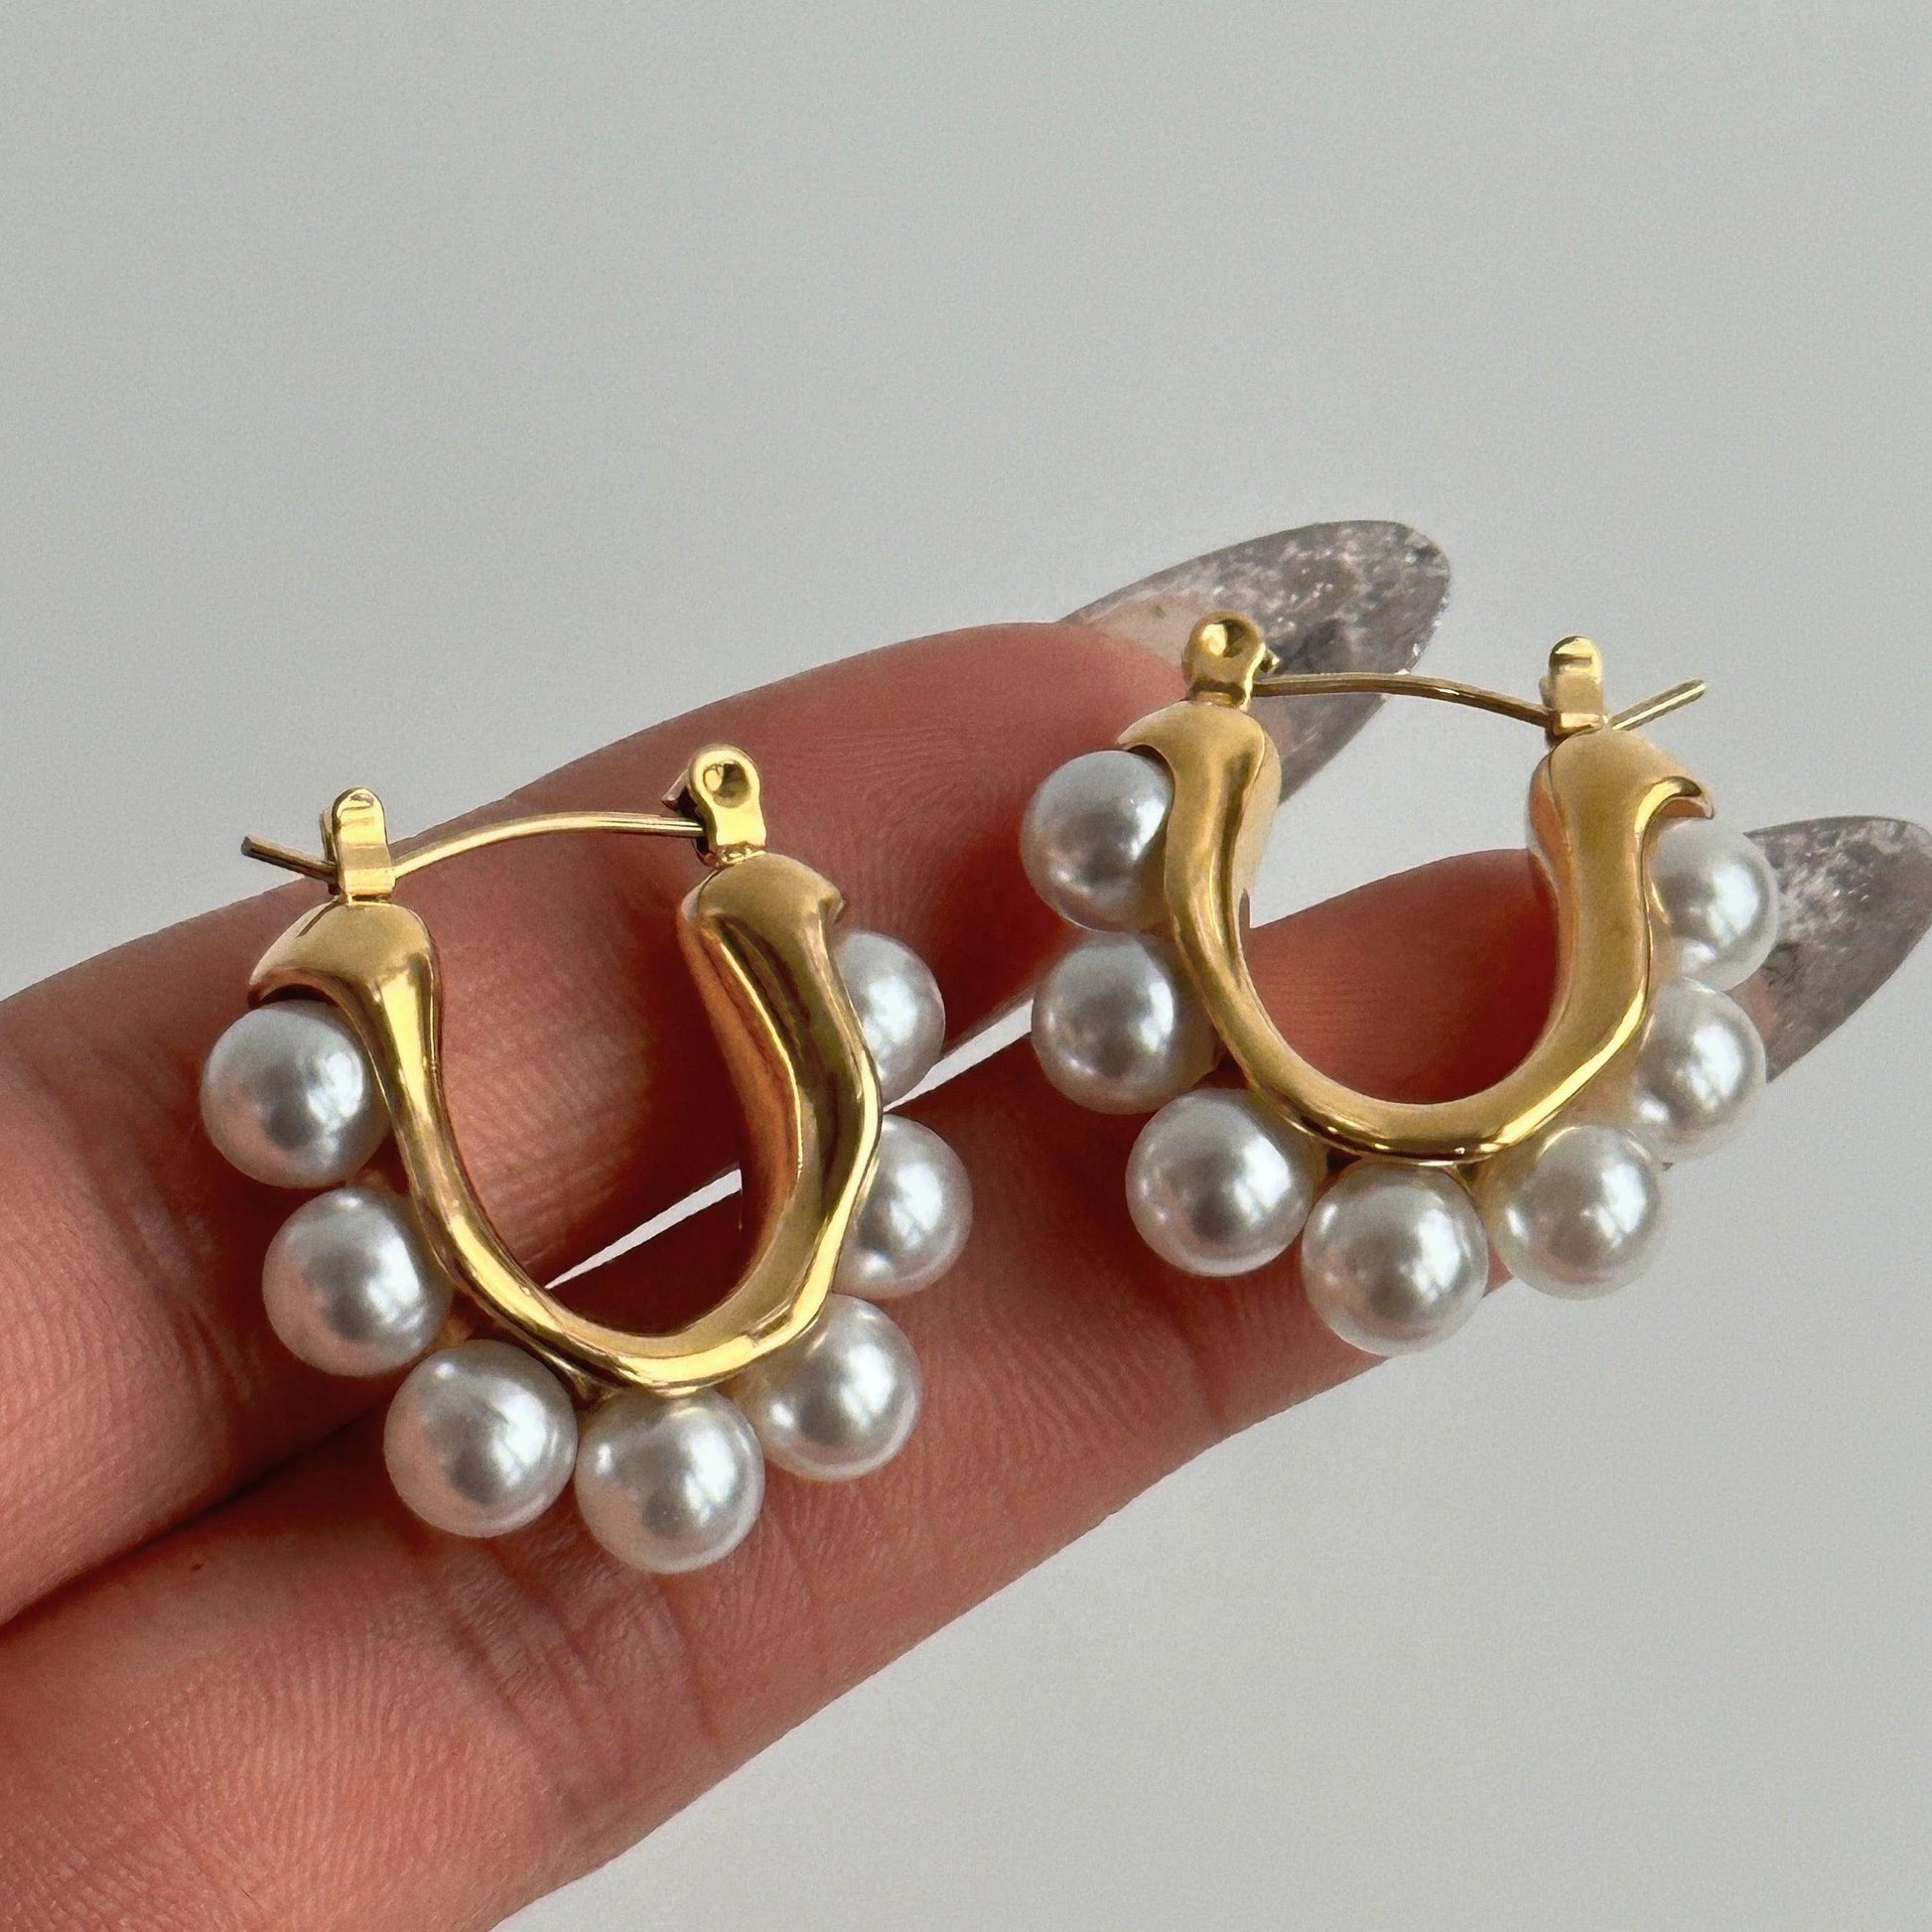 Ayna hoops | 18k gold plated earrings. - Ladywithcraft